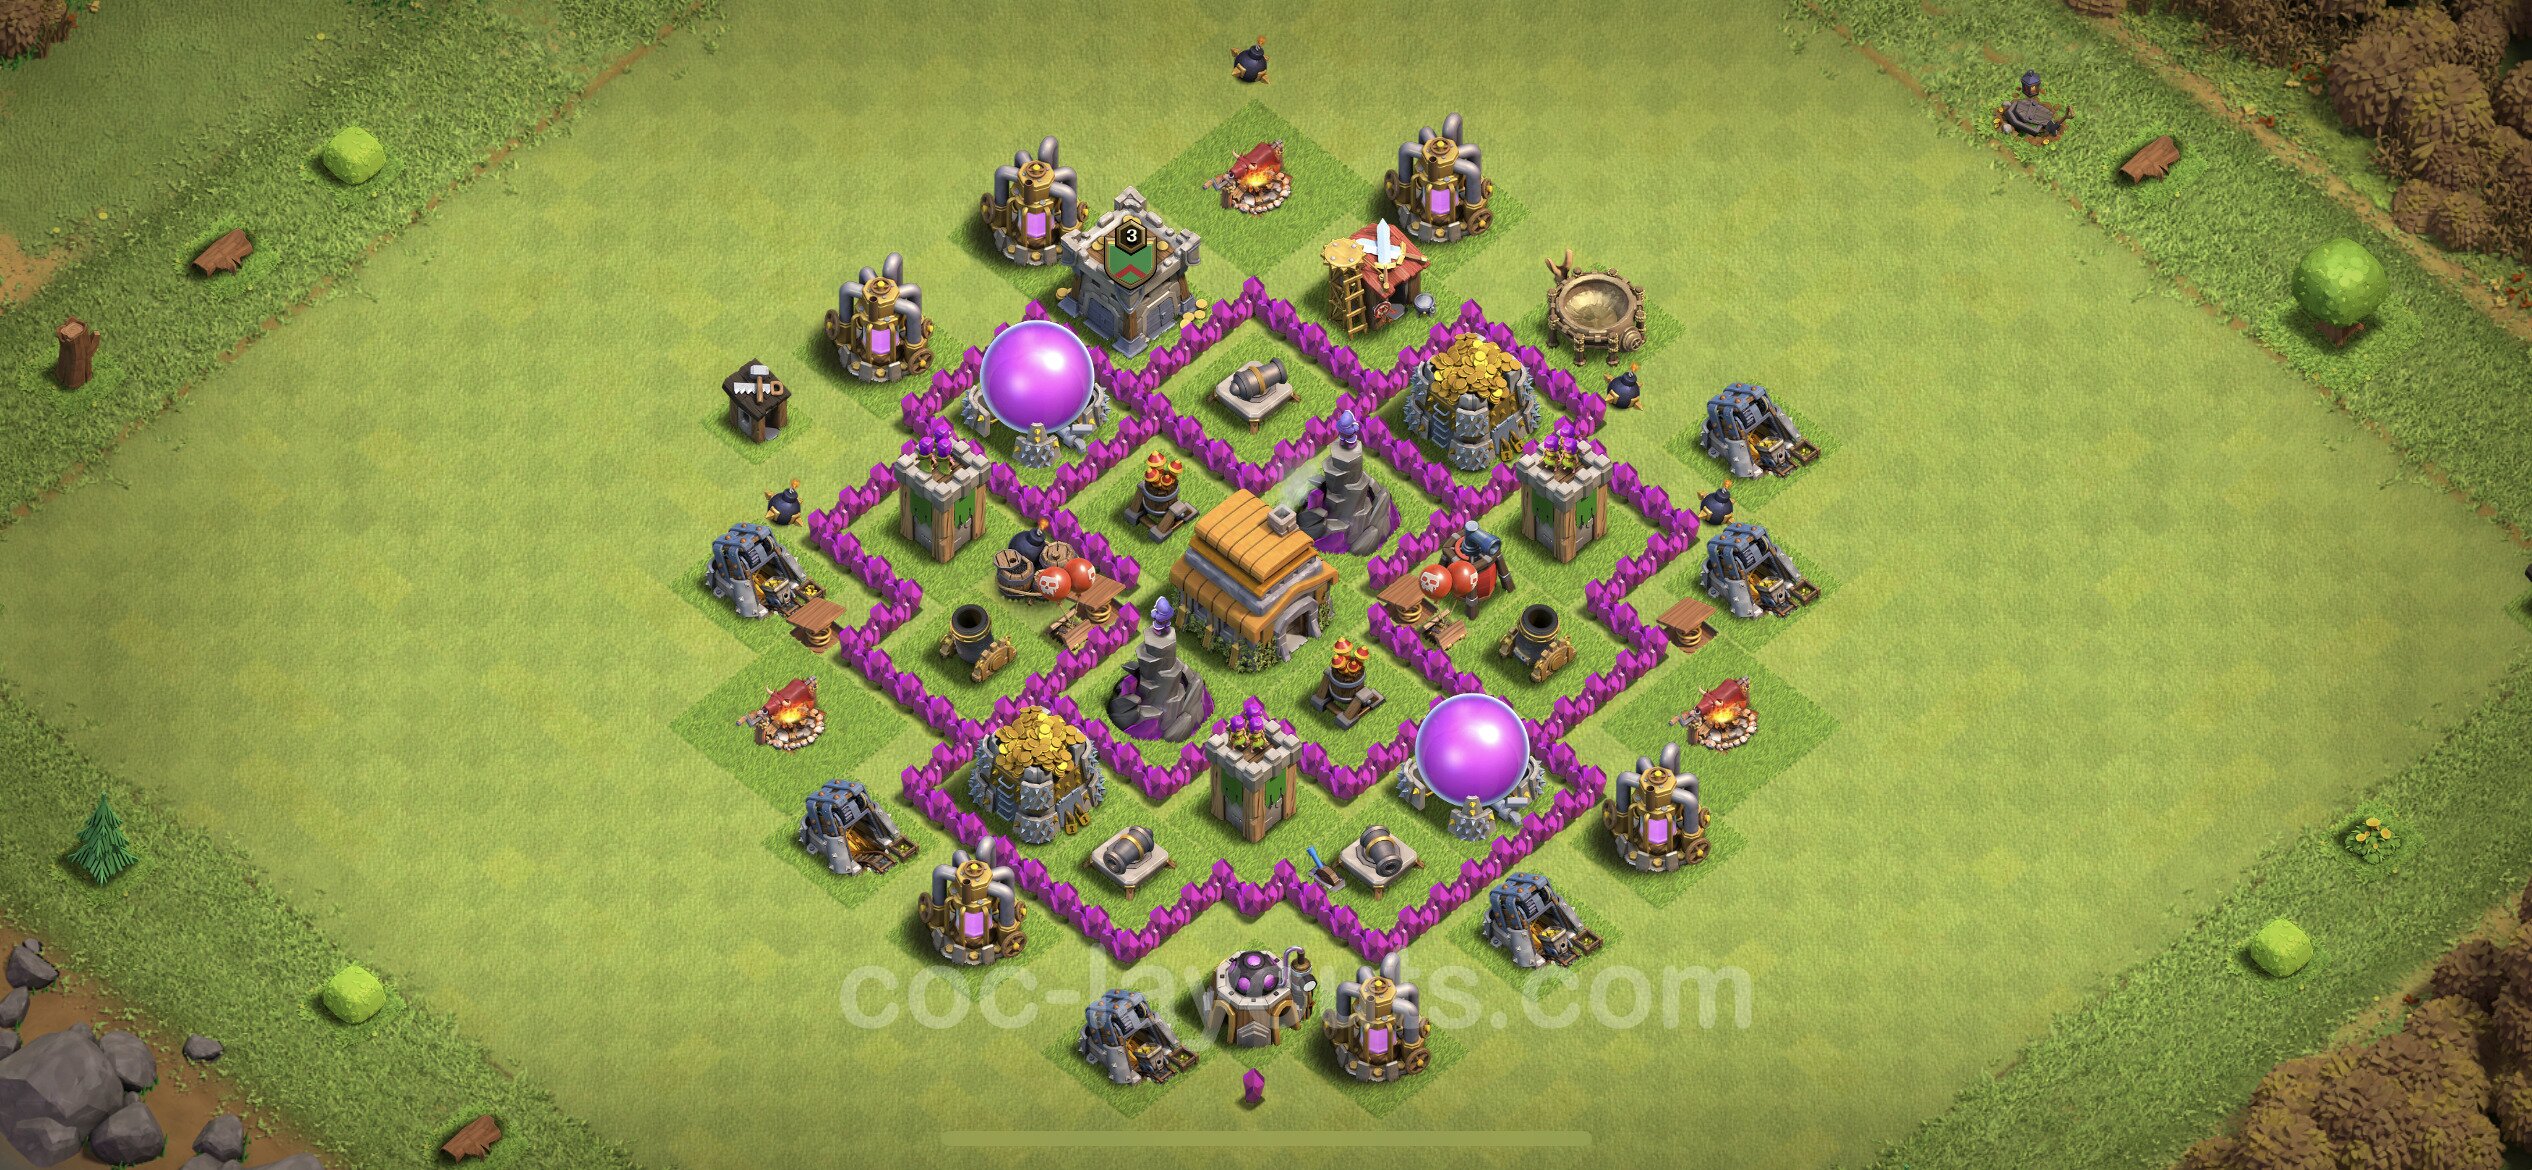 Farming Base TH6 Max Levels with Link, Hybrid, Anti Everythi